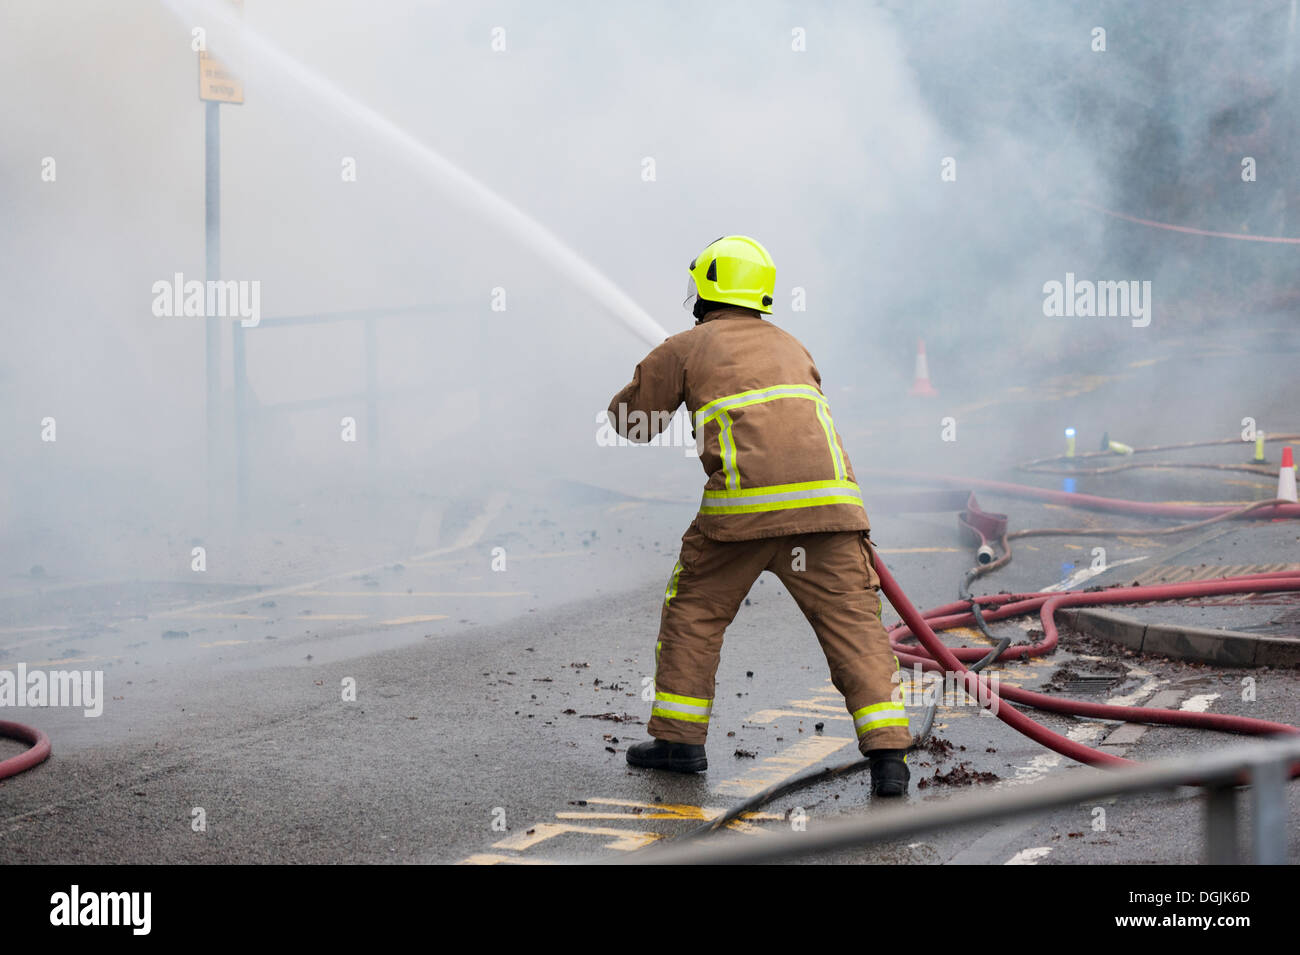 A member of the Essex Fire Service tackles a fire with a hose. Stock Photo